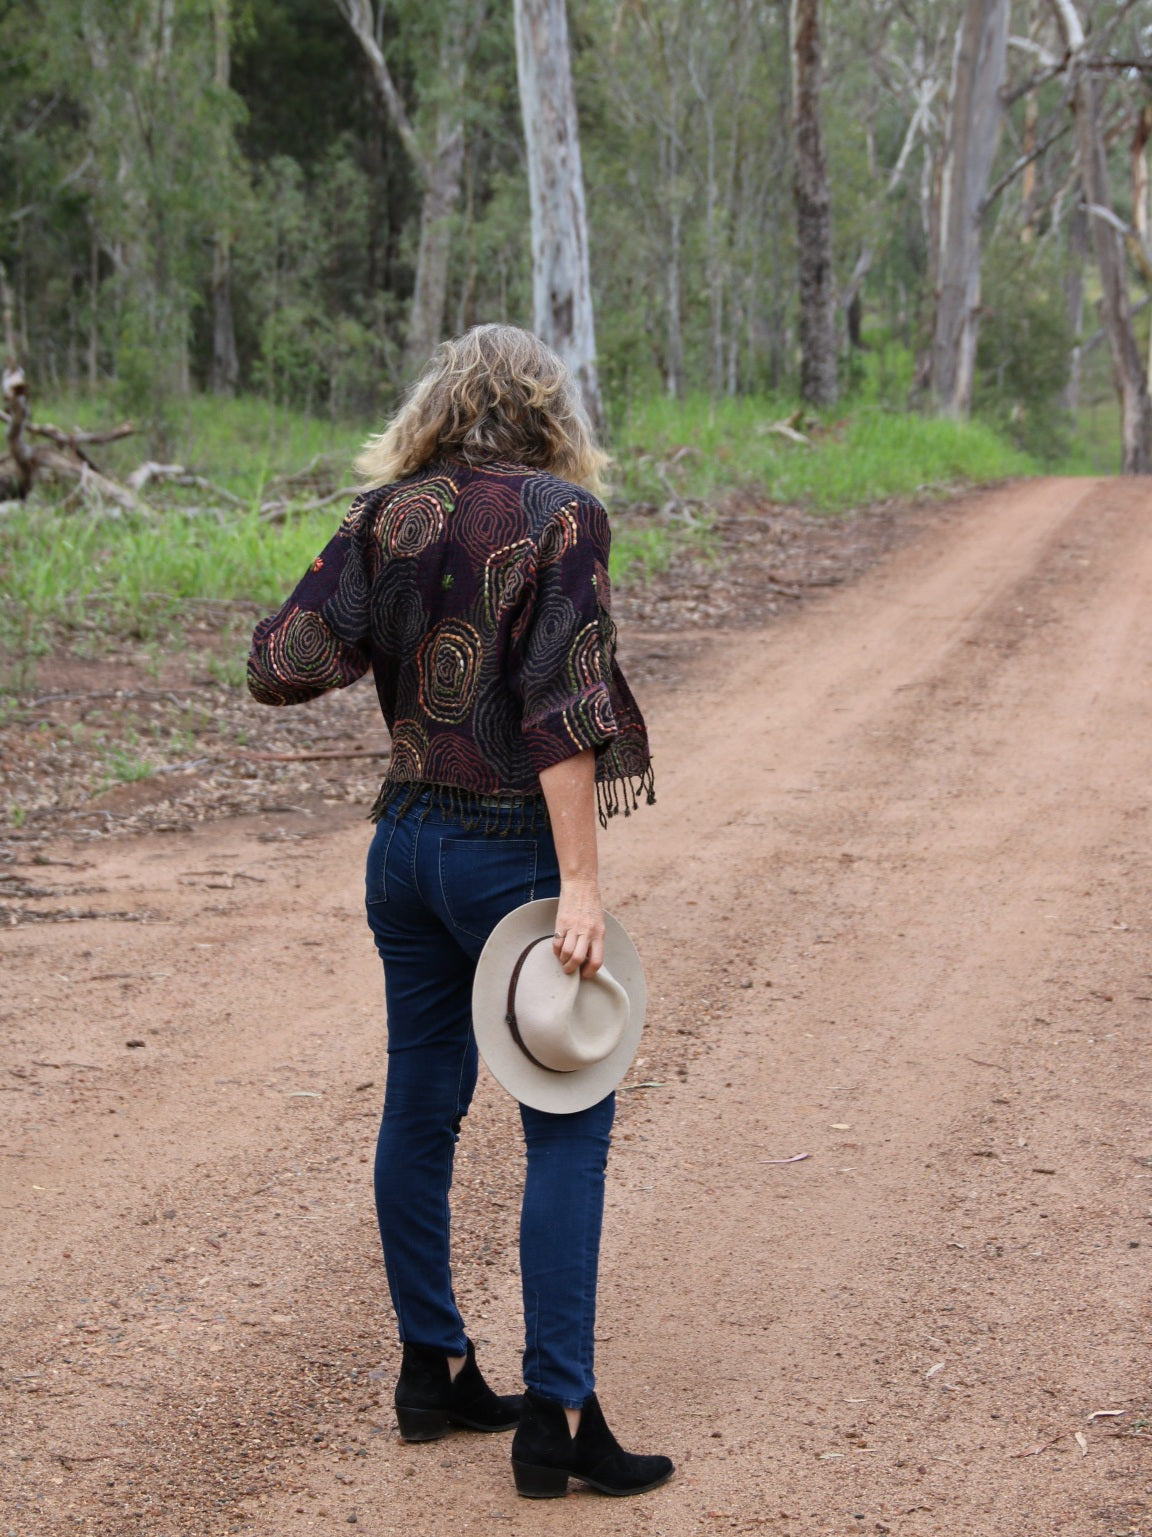 Back view of a lady with wool jacket on dirt road